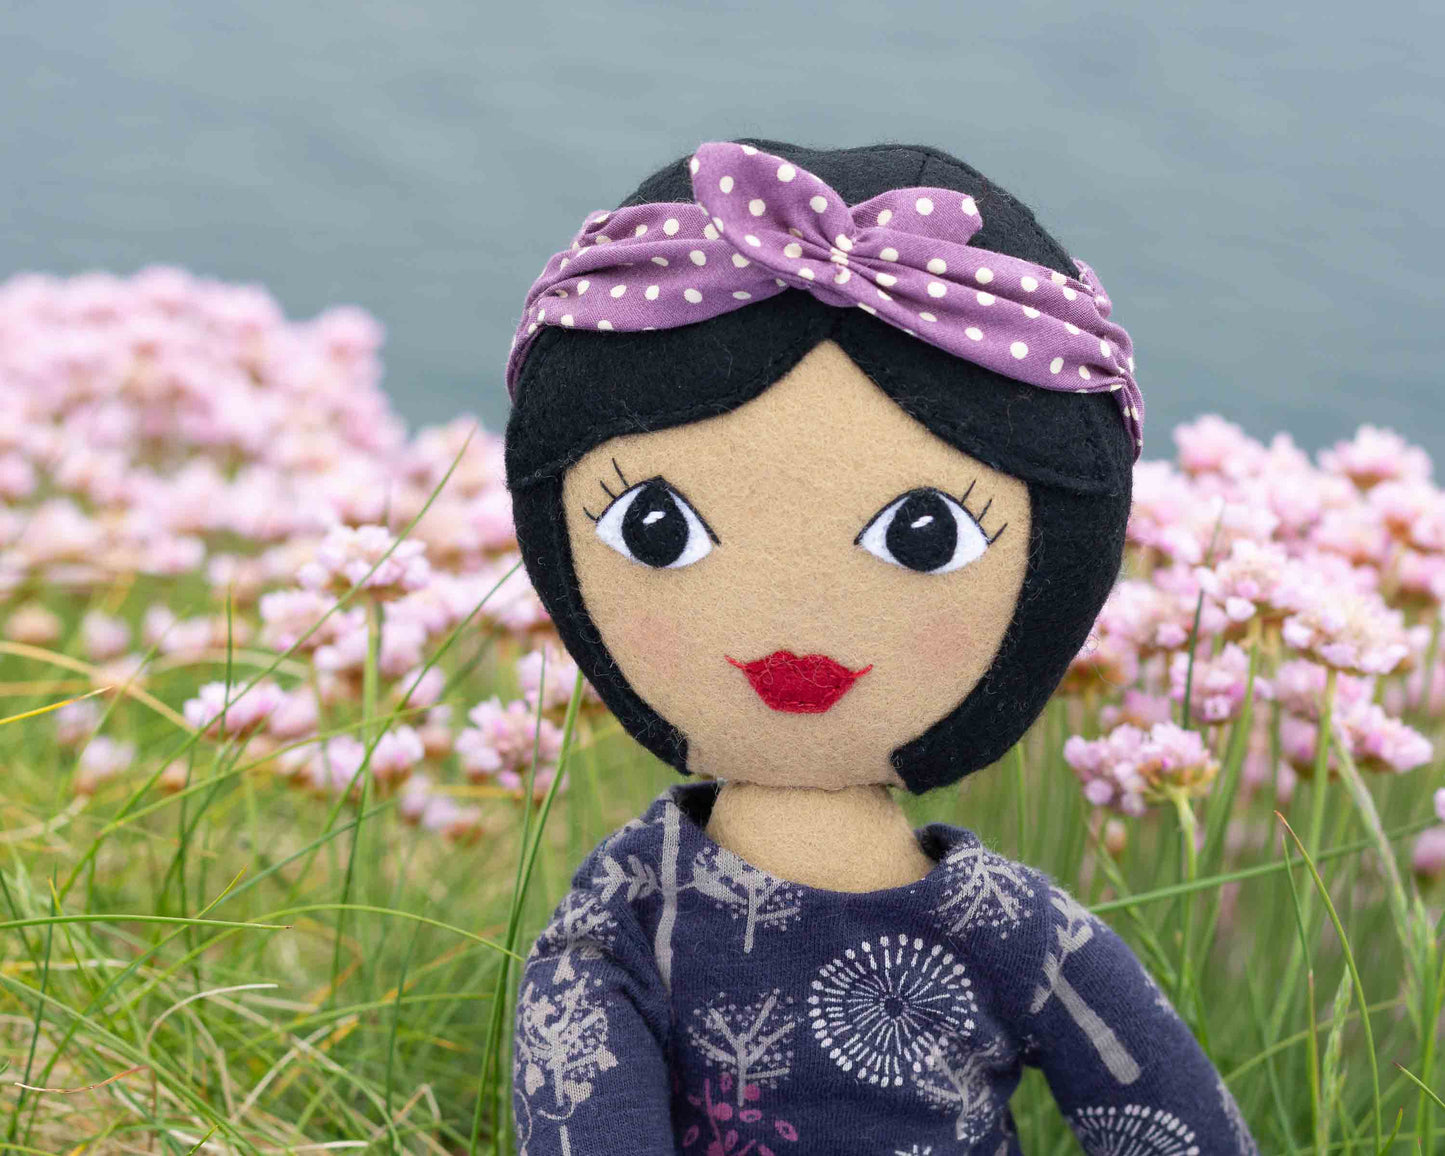 Tilly the Felt Doll Sewing Pattern